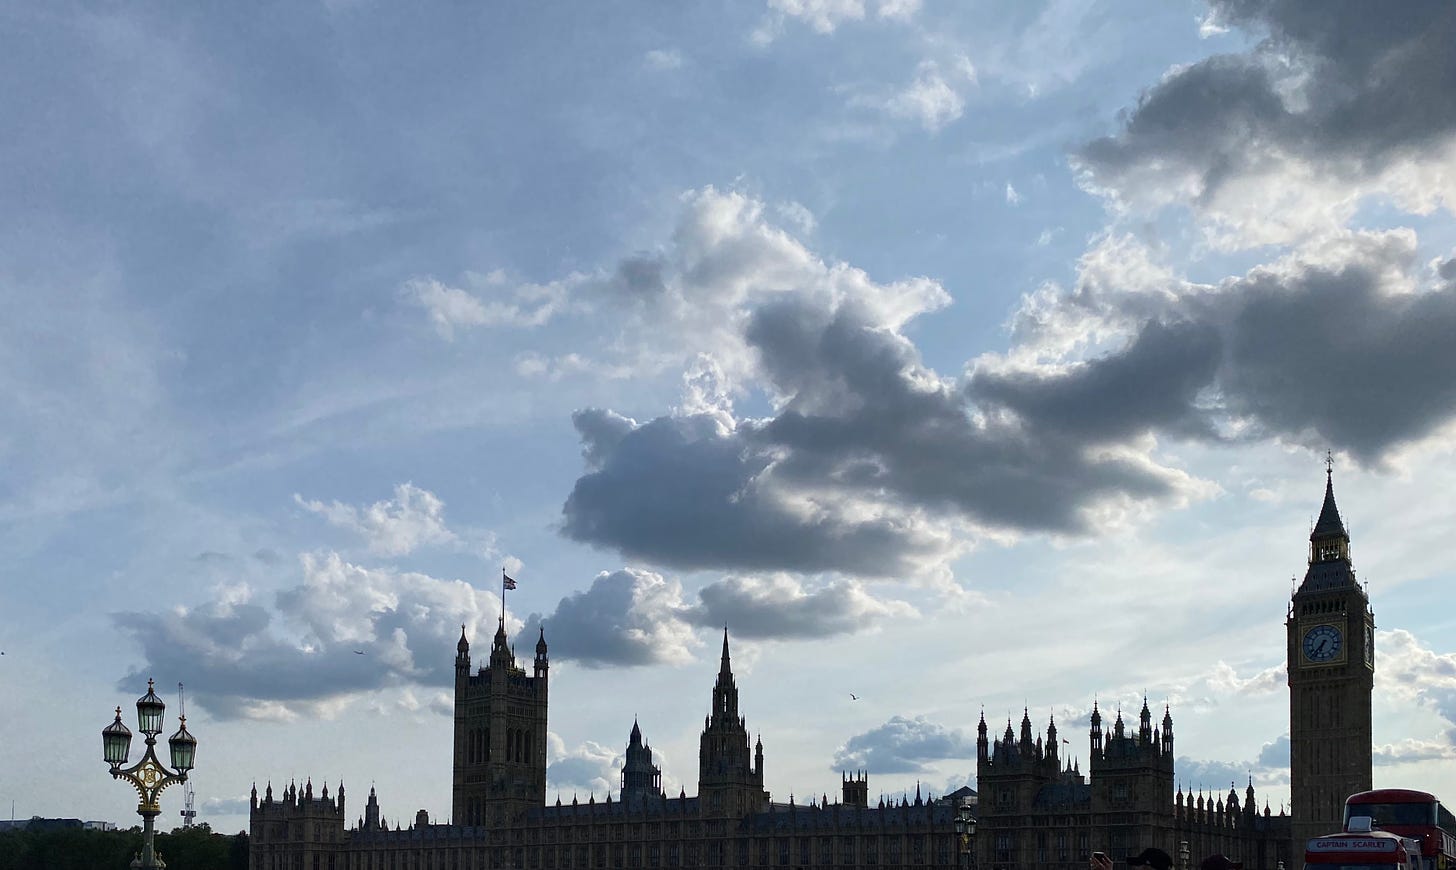 the houses of parliament silhouetted against a pale blue cloudy sky, the sharp spires contrasting with the softness of the clouds